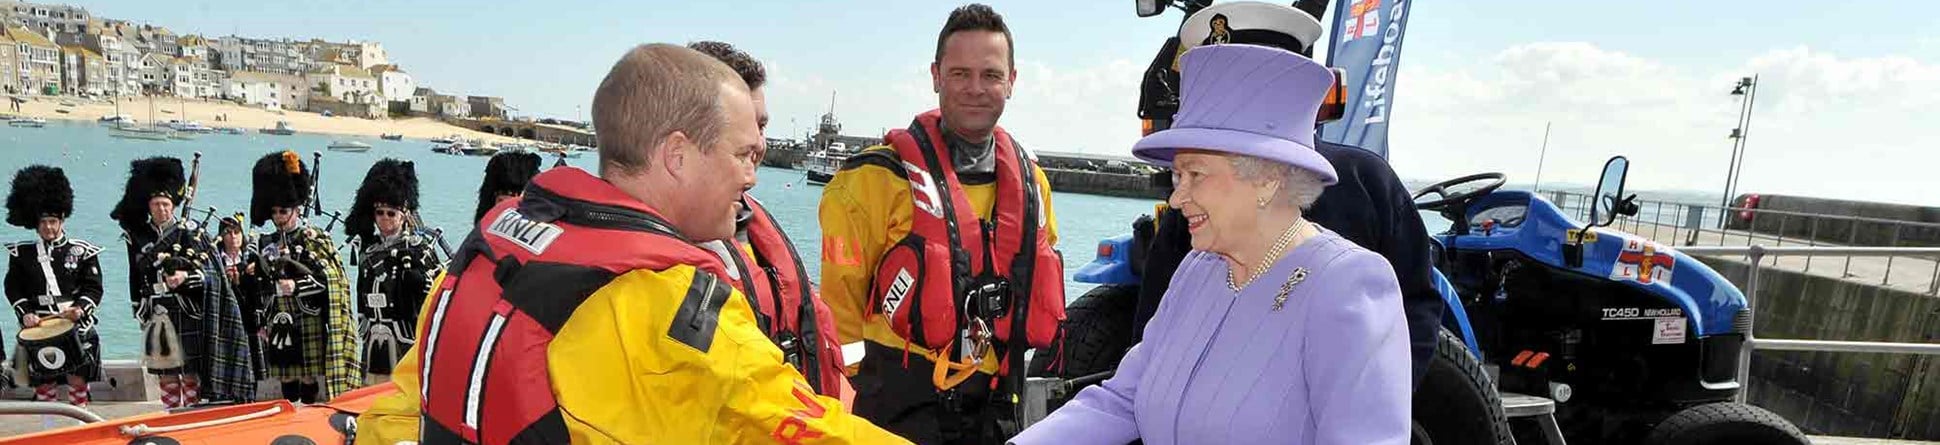 Queen Elizabeth II greets members of a lifeboat crew during a visit to the RNLI station in St Ives, Cornwall. 